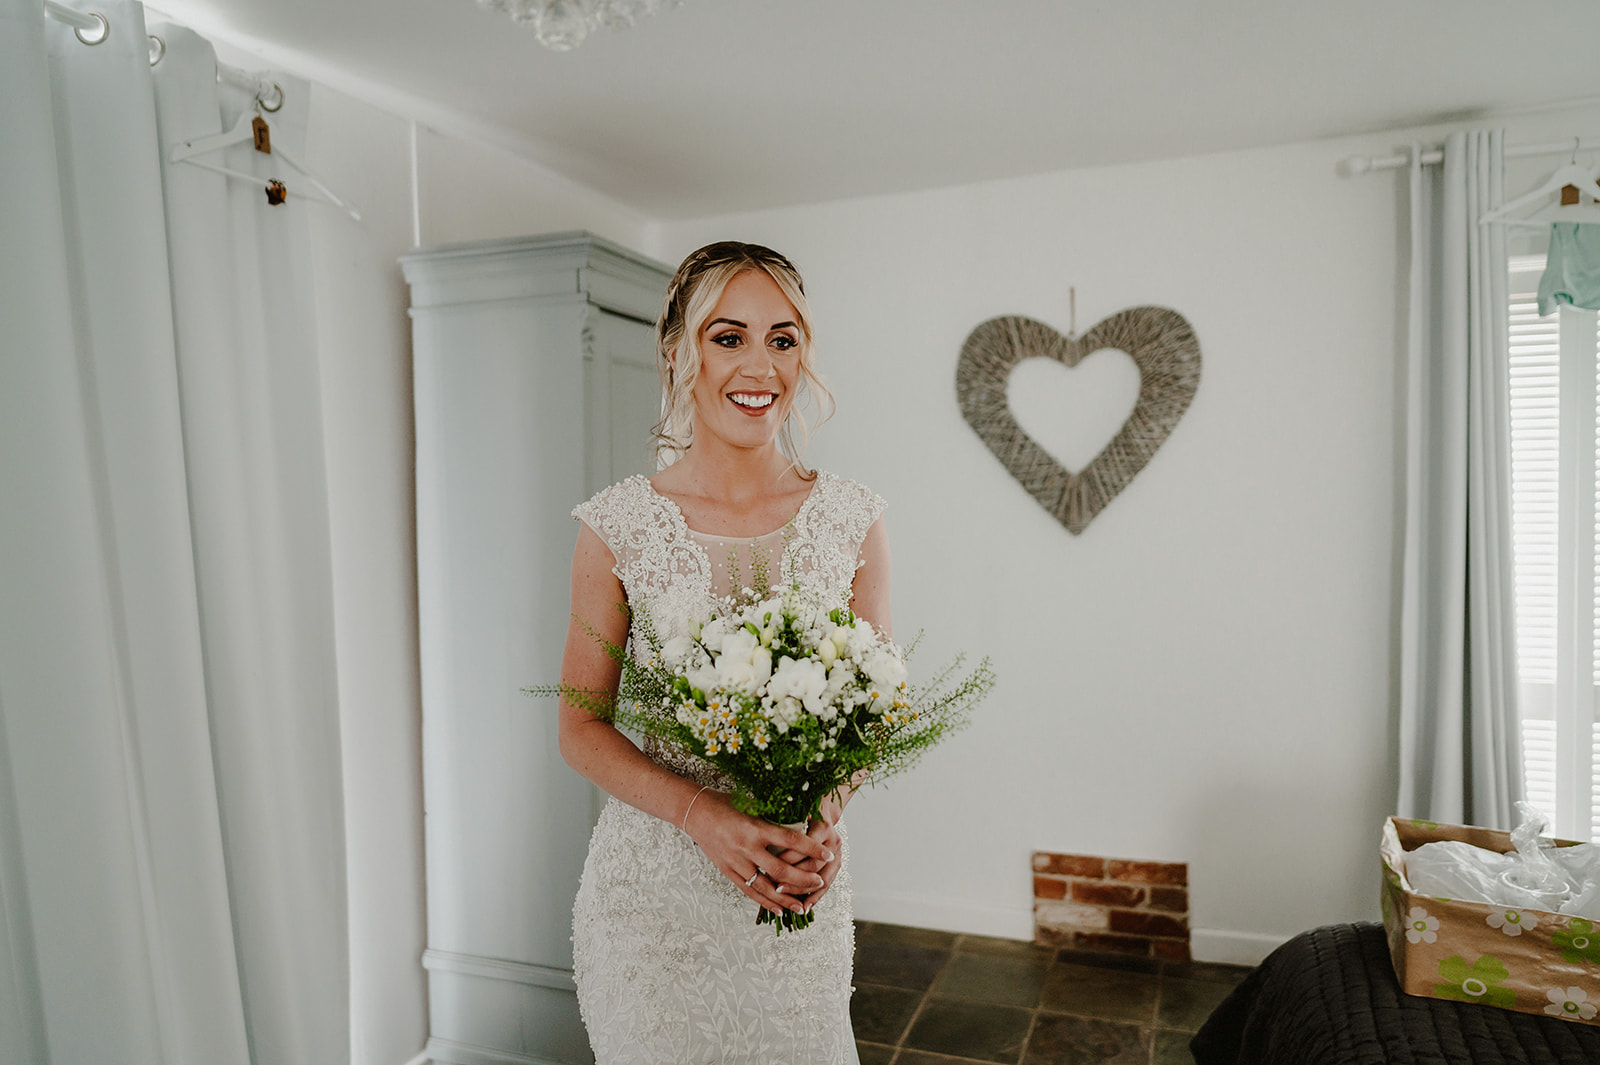 bride at villiers barn holding her flowers smiling indoors before the wedding ceremony